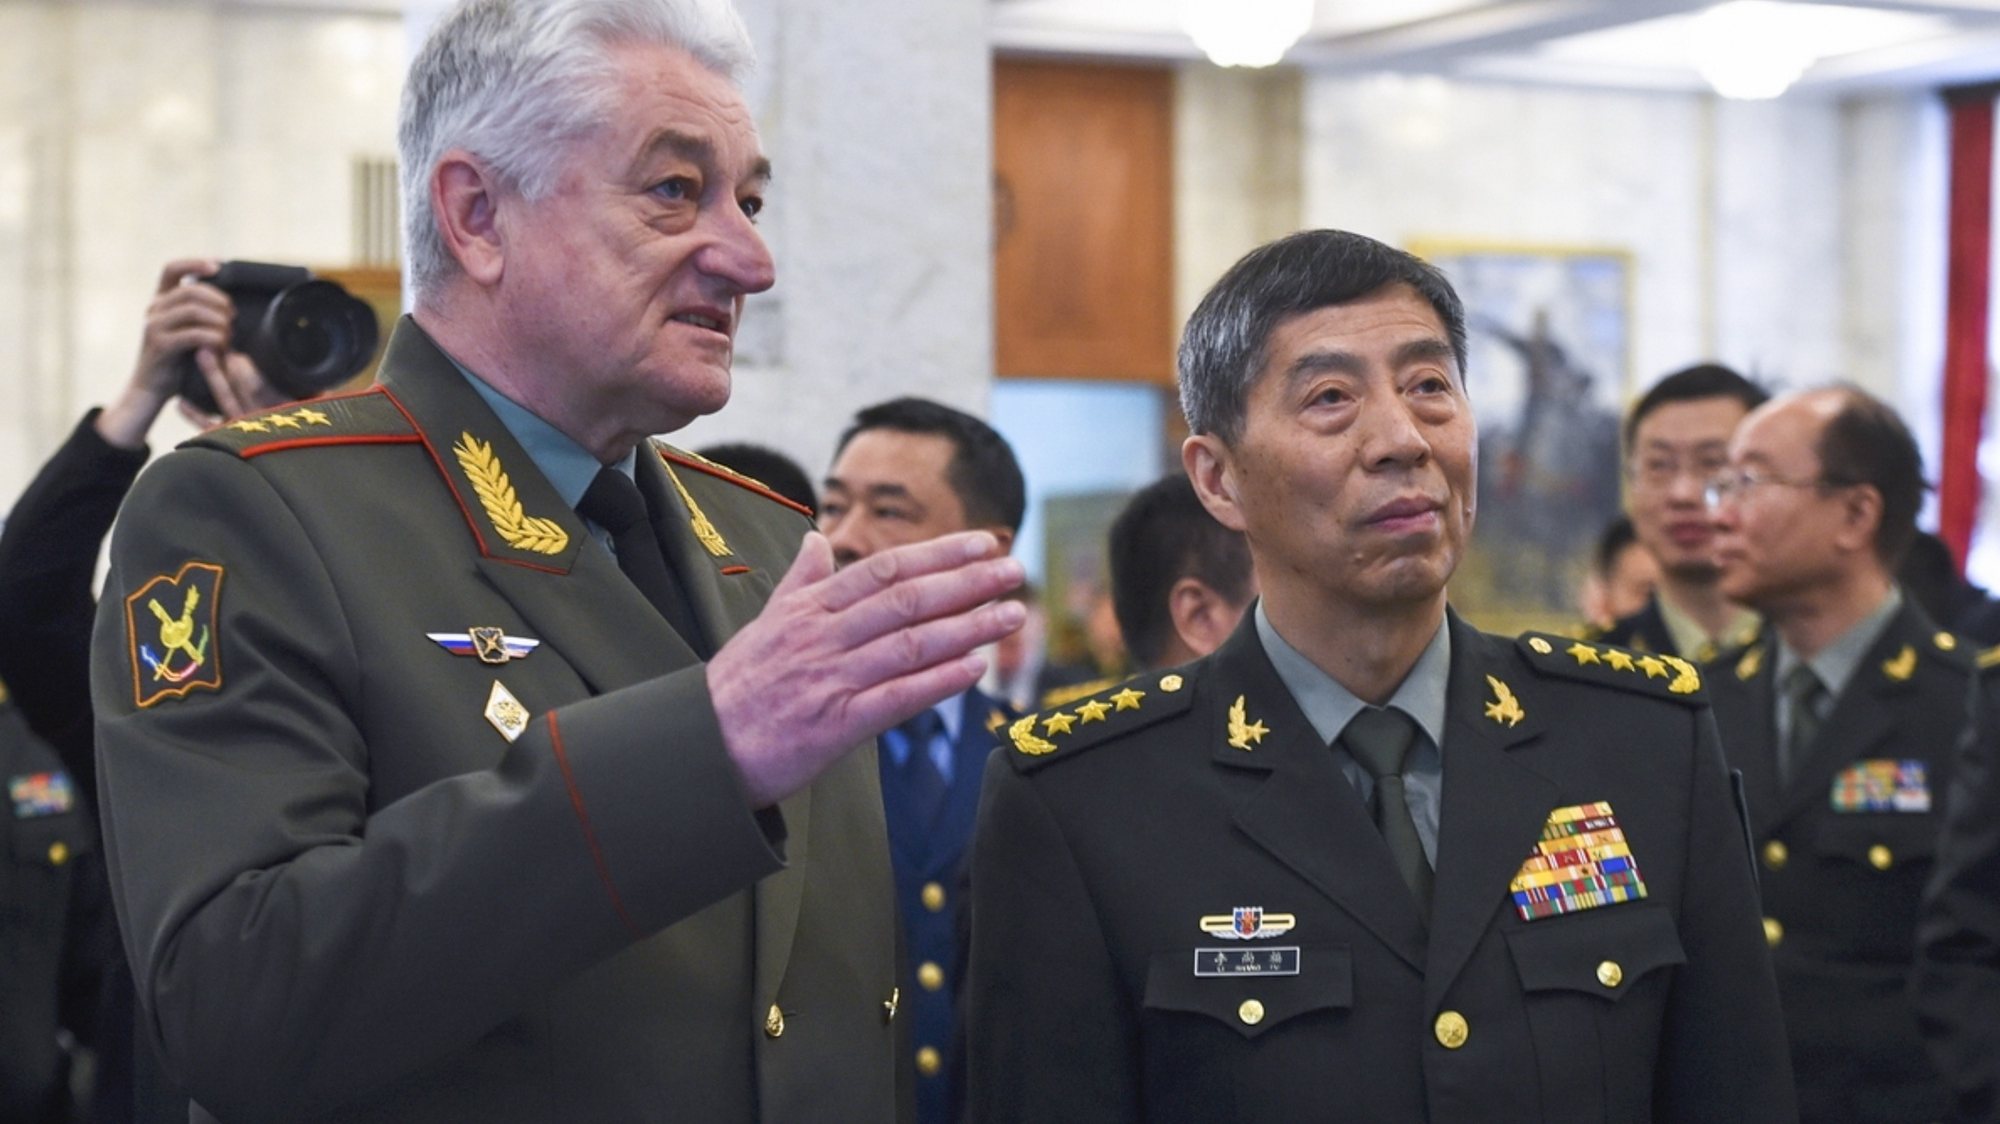 epa10576753 A handout photo made available by the Russian Defence Ministry press-service shows the Head of the Military Academy of the General Staff of the Armed Forces of the Russian Federation, Colonel General Vladimir Zarudnitsky (L) welcoming Chinese Defence Minister Gen. Li Shangfu (C) during a visit to the Military Academy of the General Staff of the Russian Armed Forces in Moscow, Russia, 17 April 2023. Chinese Defence Minister and State Councilor Gen. Li Shangfu is in Russia on an official visit.  EPA/RUSSIAN DEFENCE MINISTRY PRESS SERVICE HANDOUT -- MANDATORY CREDIT -- HANDOUT EDITORIAL USE ONLY/NO SALES